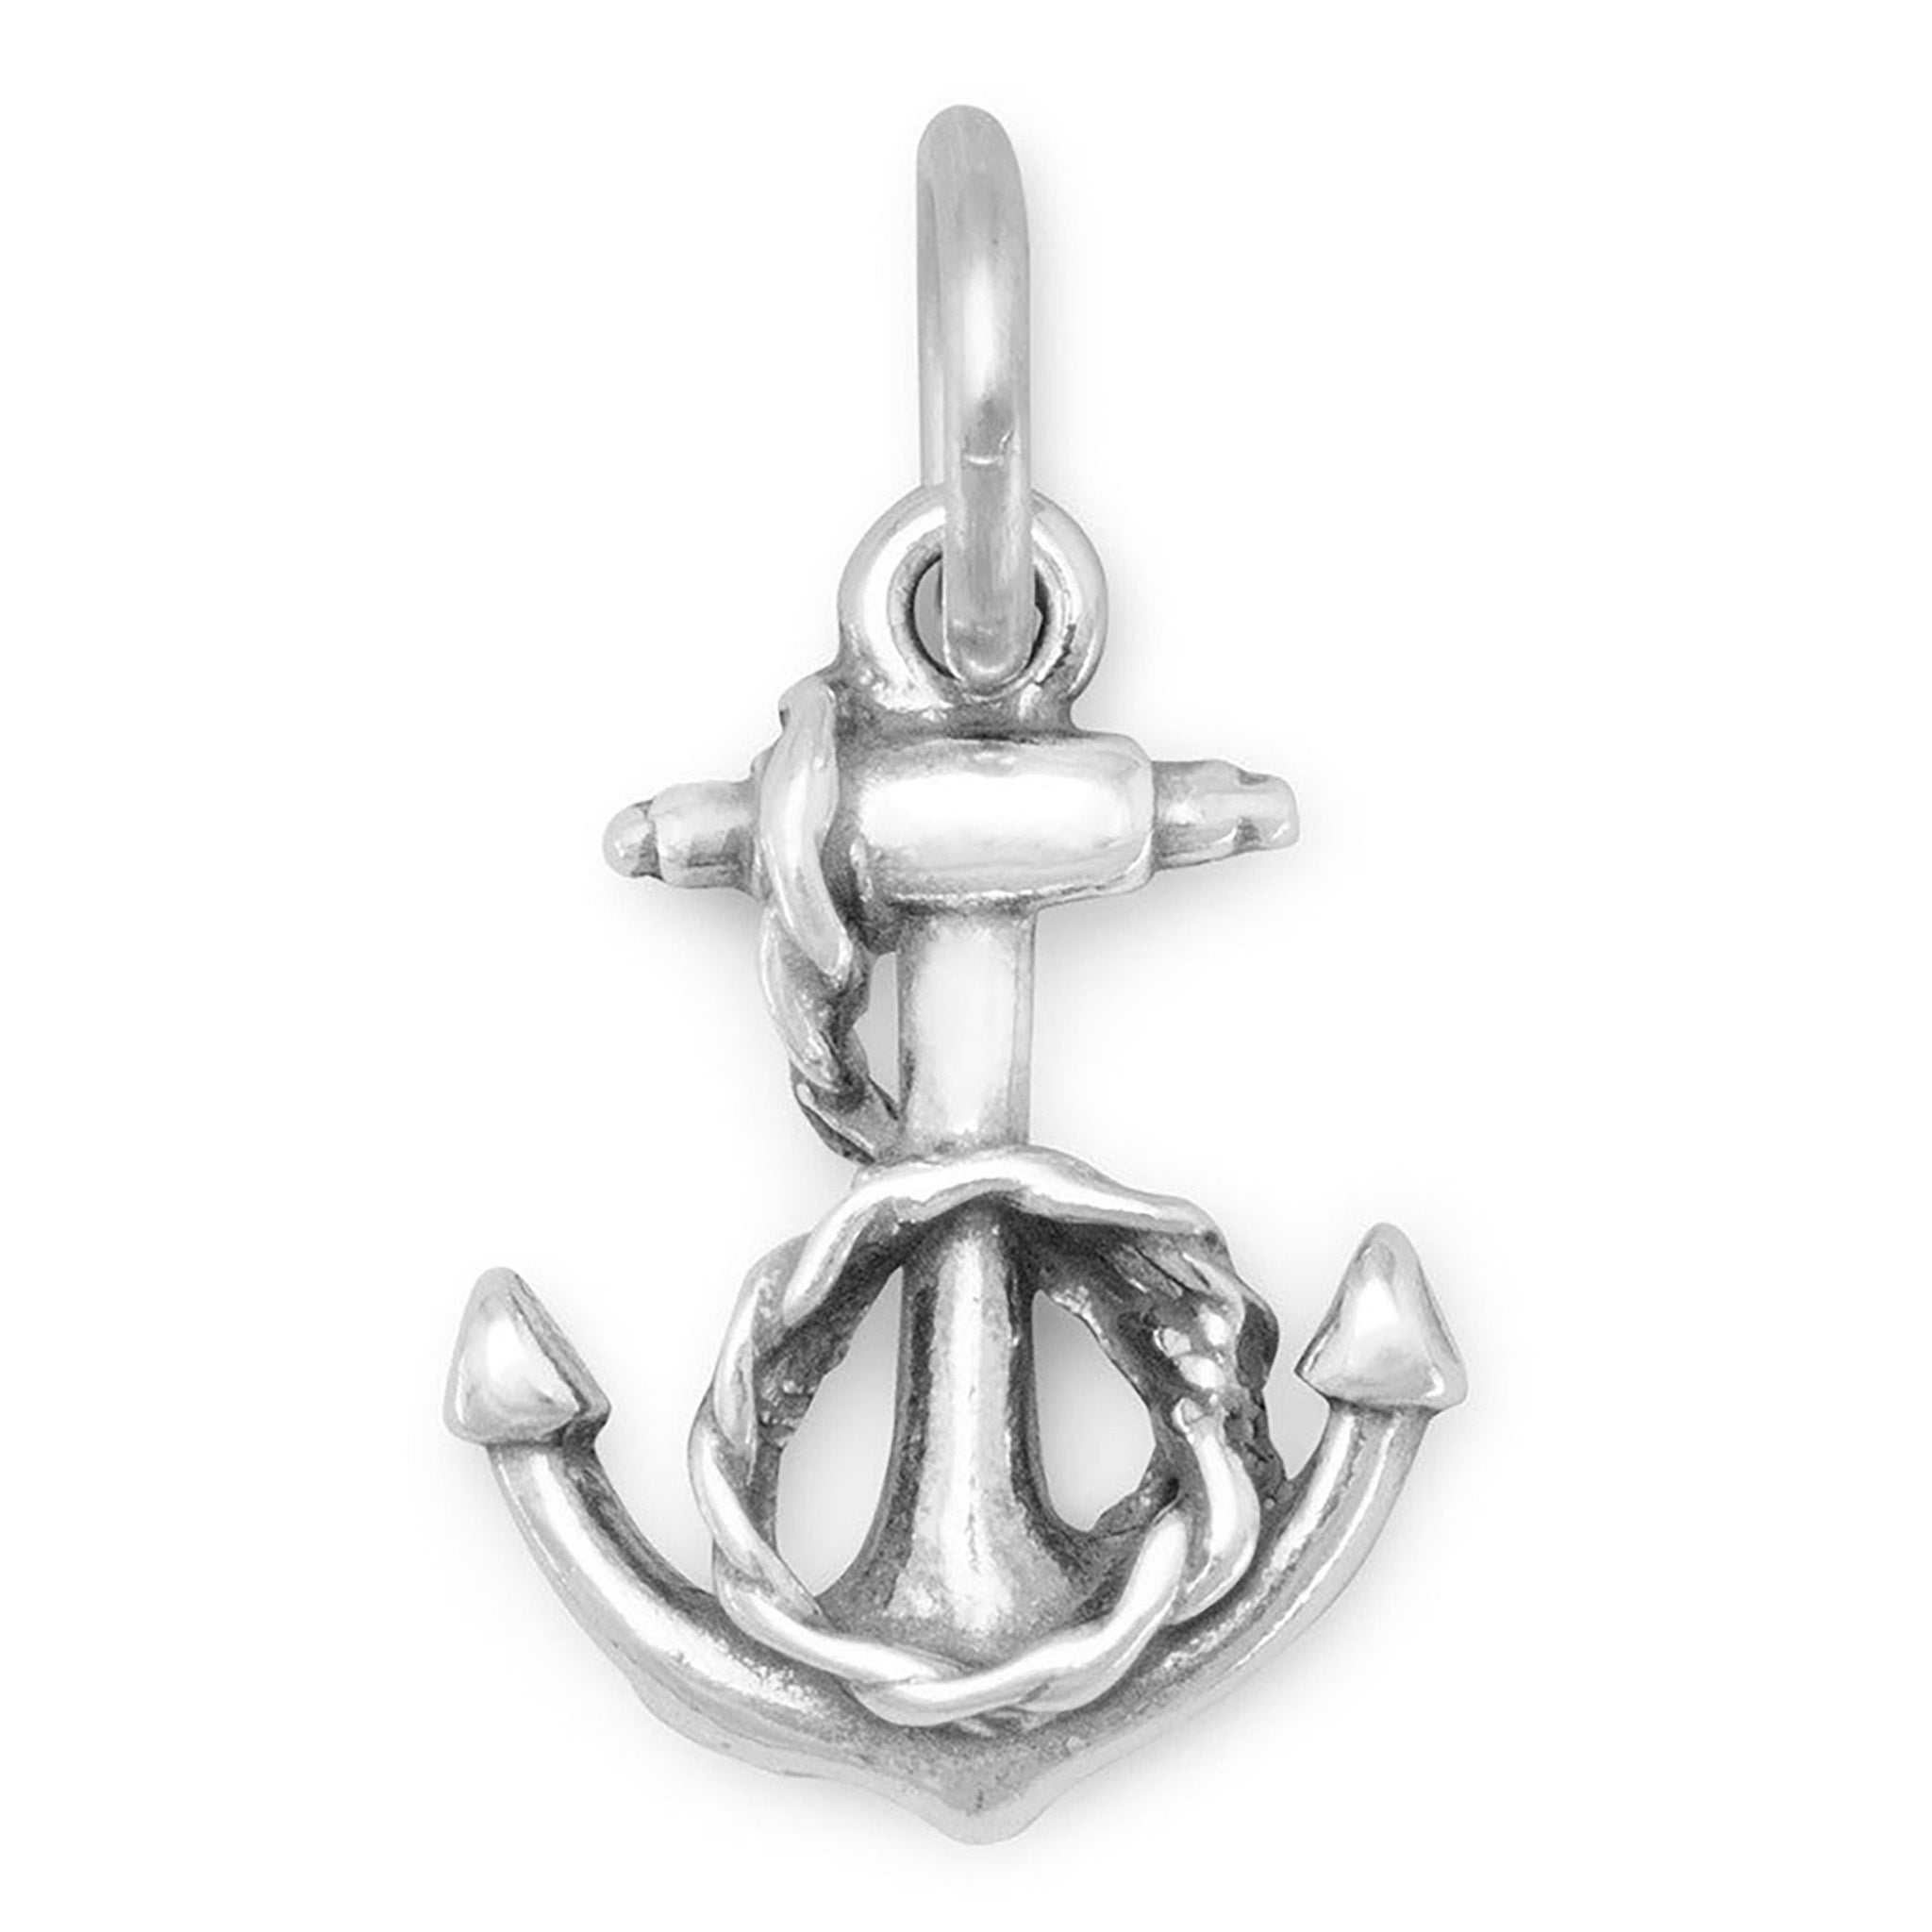 Anchor and Rope Charm